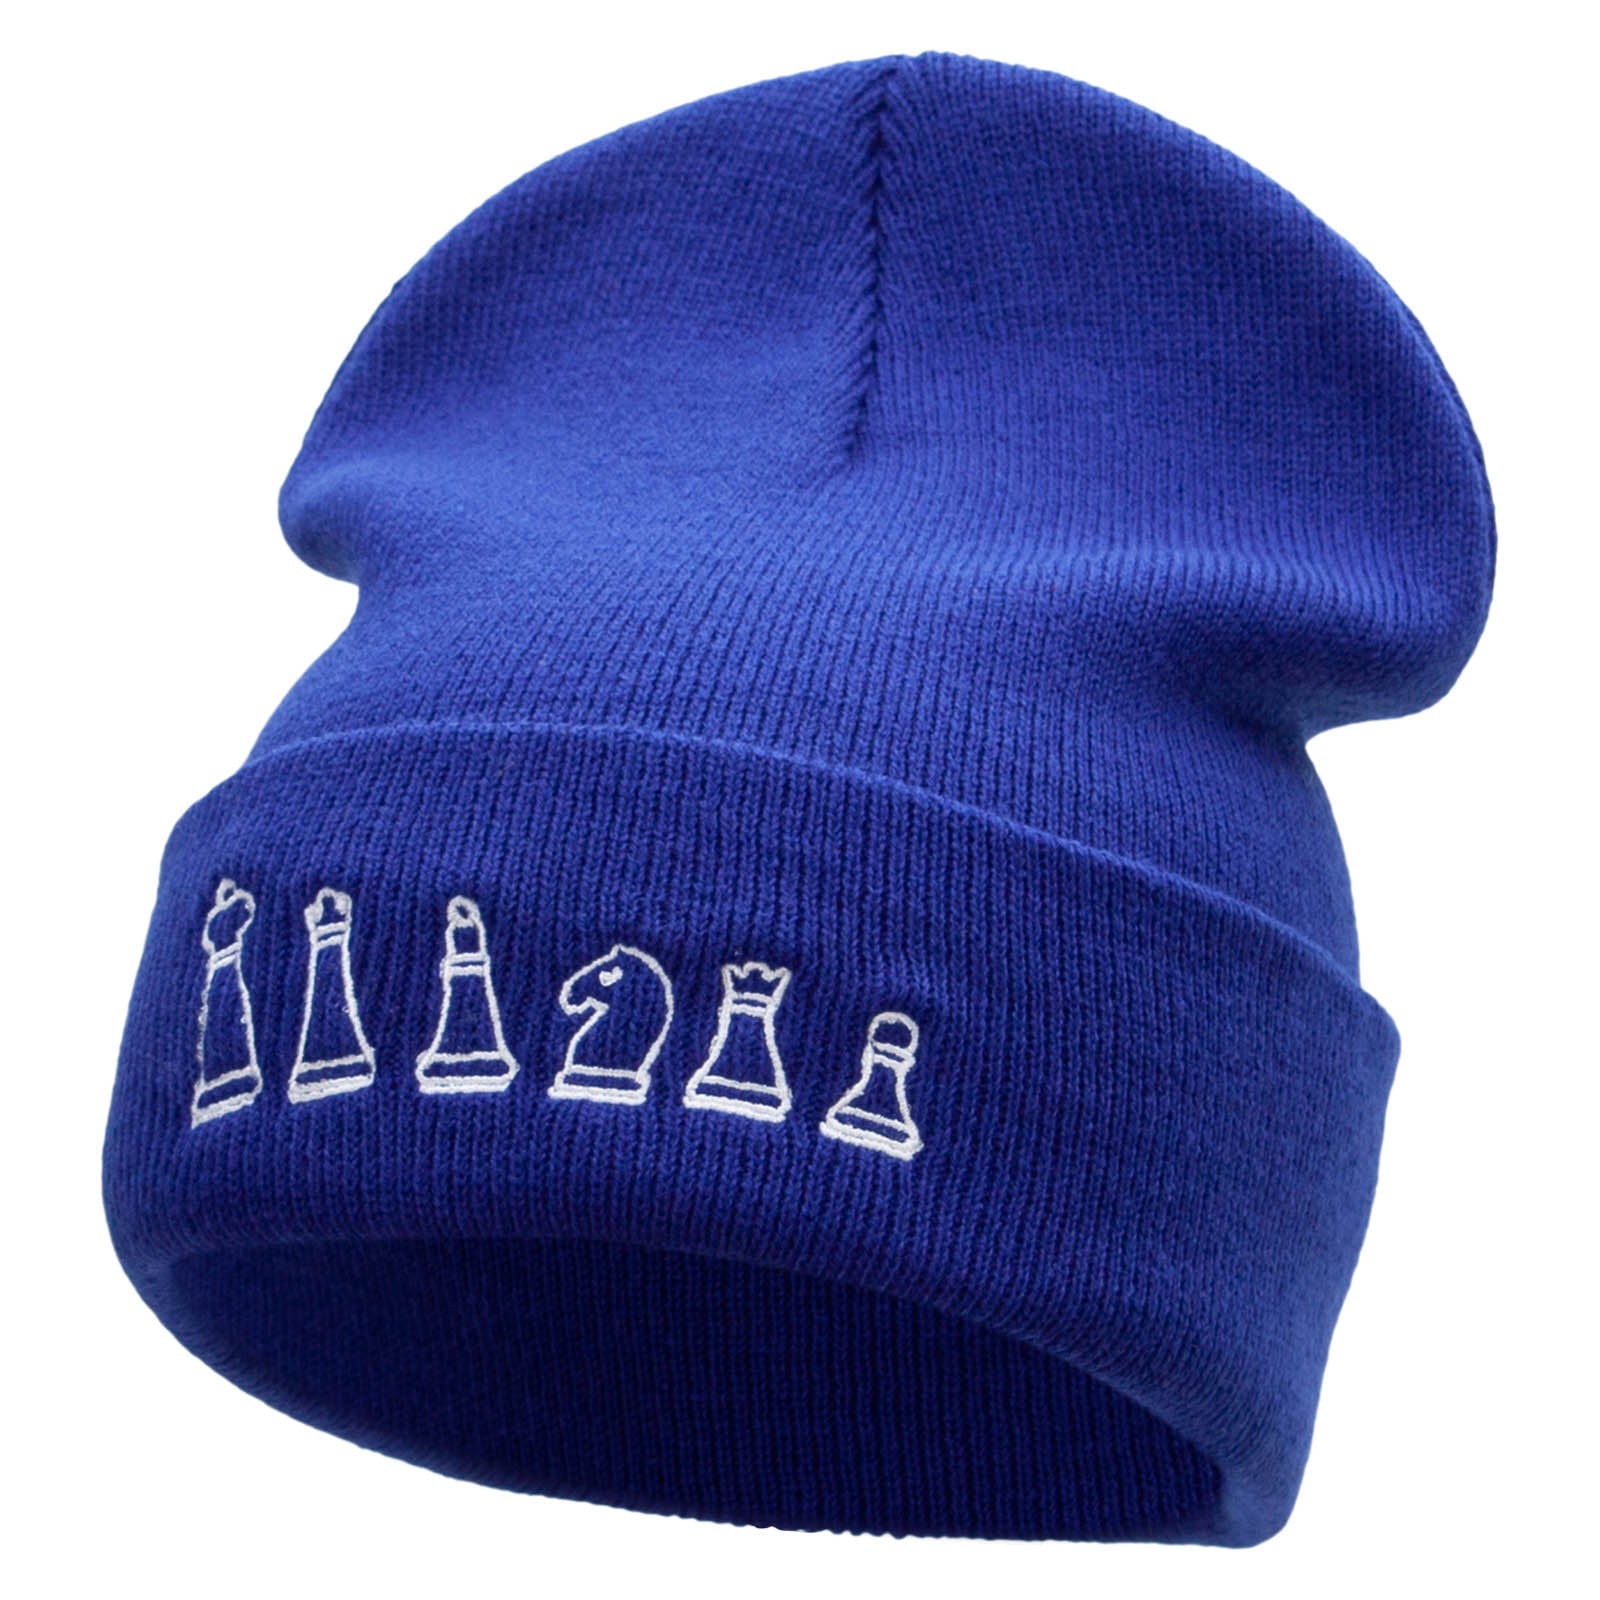 The Chest Set Embroidered 12 Inch Long Knitted Beanie - Royal OSFM